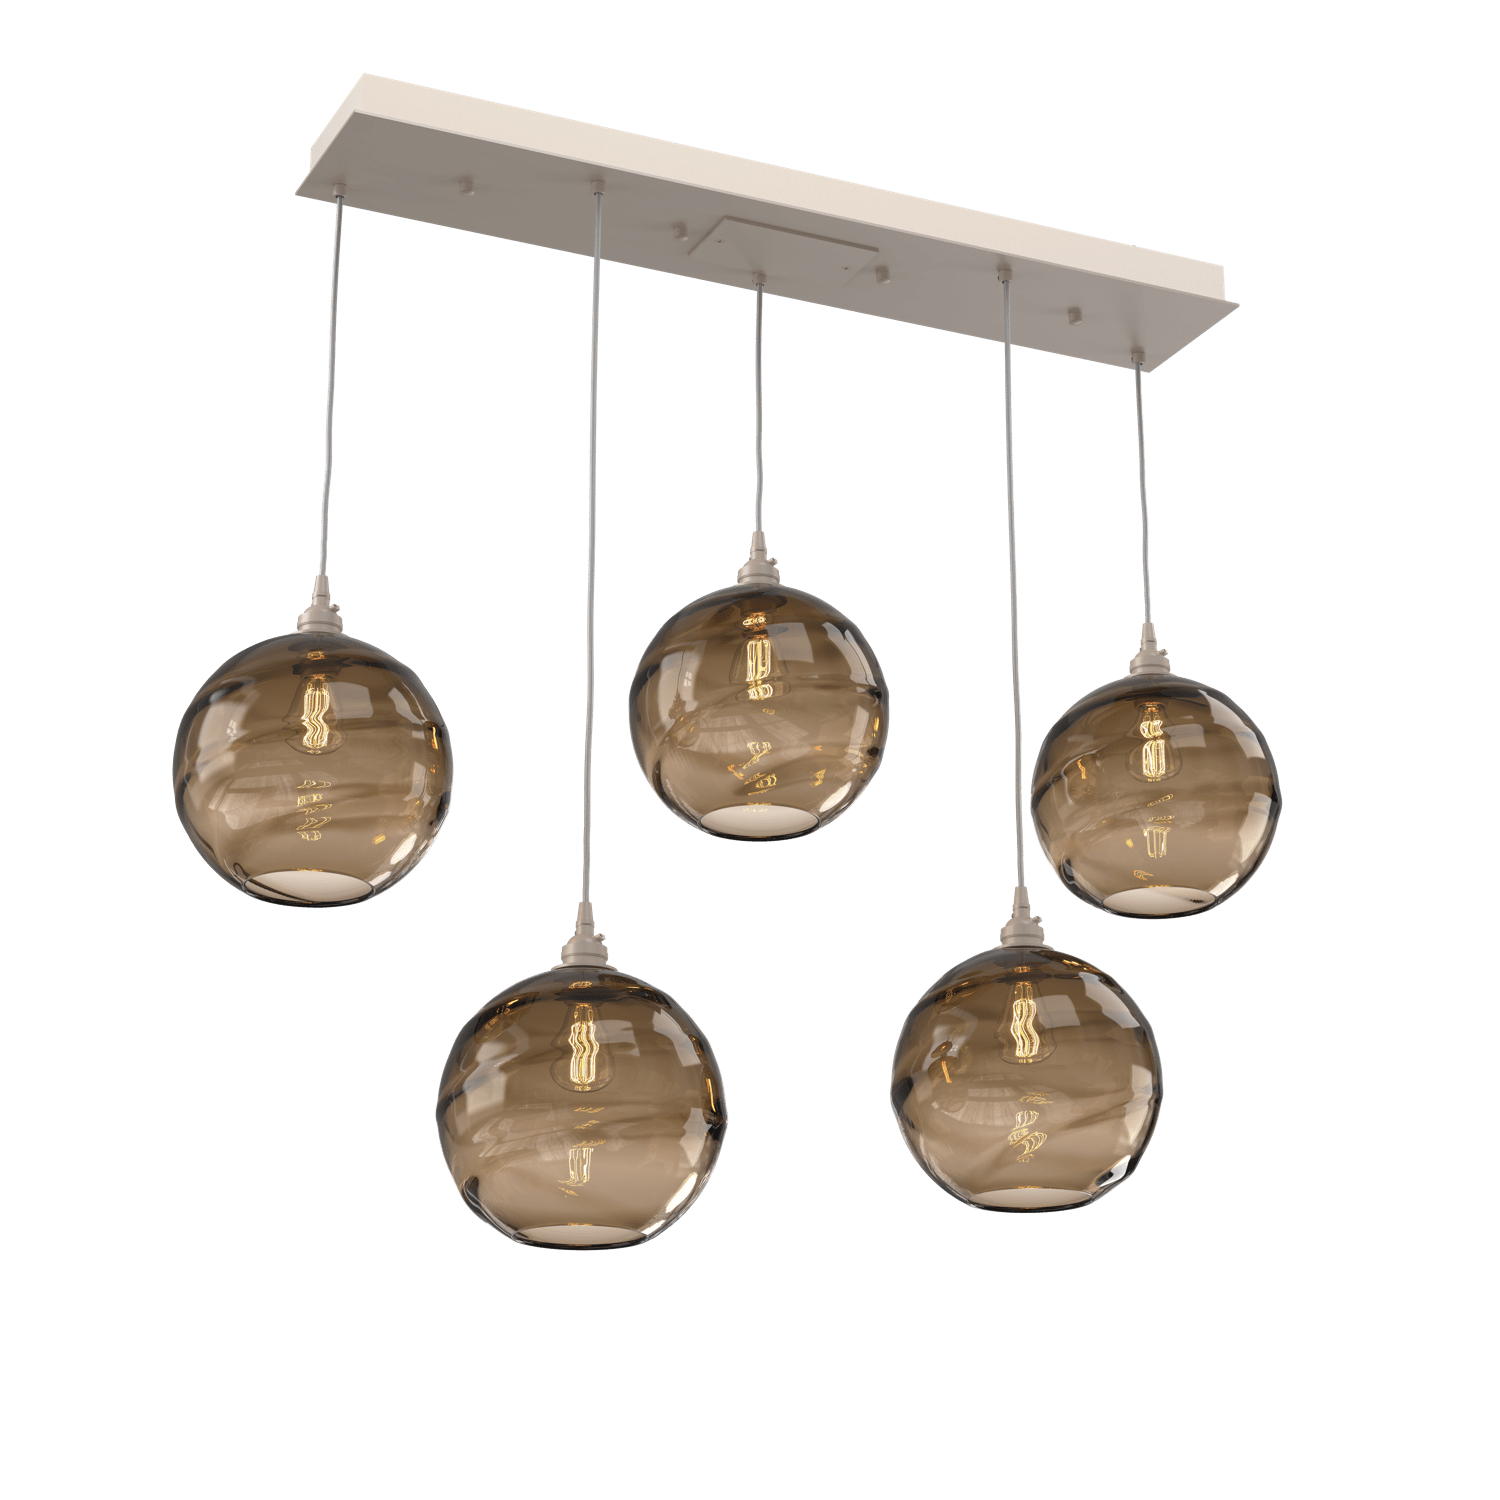 PLB0047-05-BS-OB-Hammerton-Studio-Optic-Blown-Glass-Terra-5-light-linear-pendant-chandelier-with-metallic-beige-silver-finish-and-optic-bronze-blown-glass-shades-and-incandescent-lamping